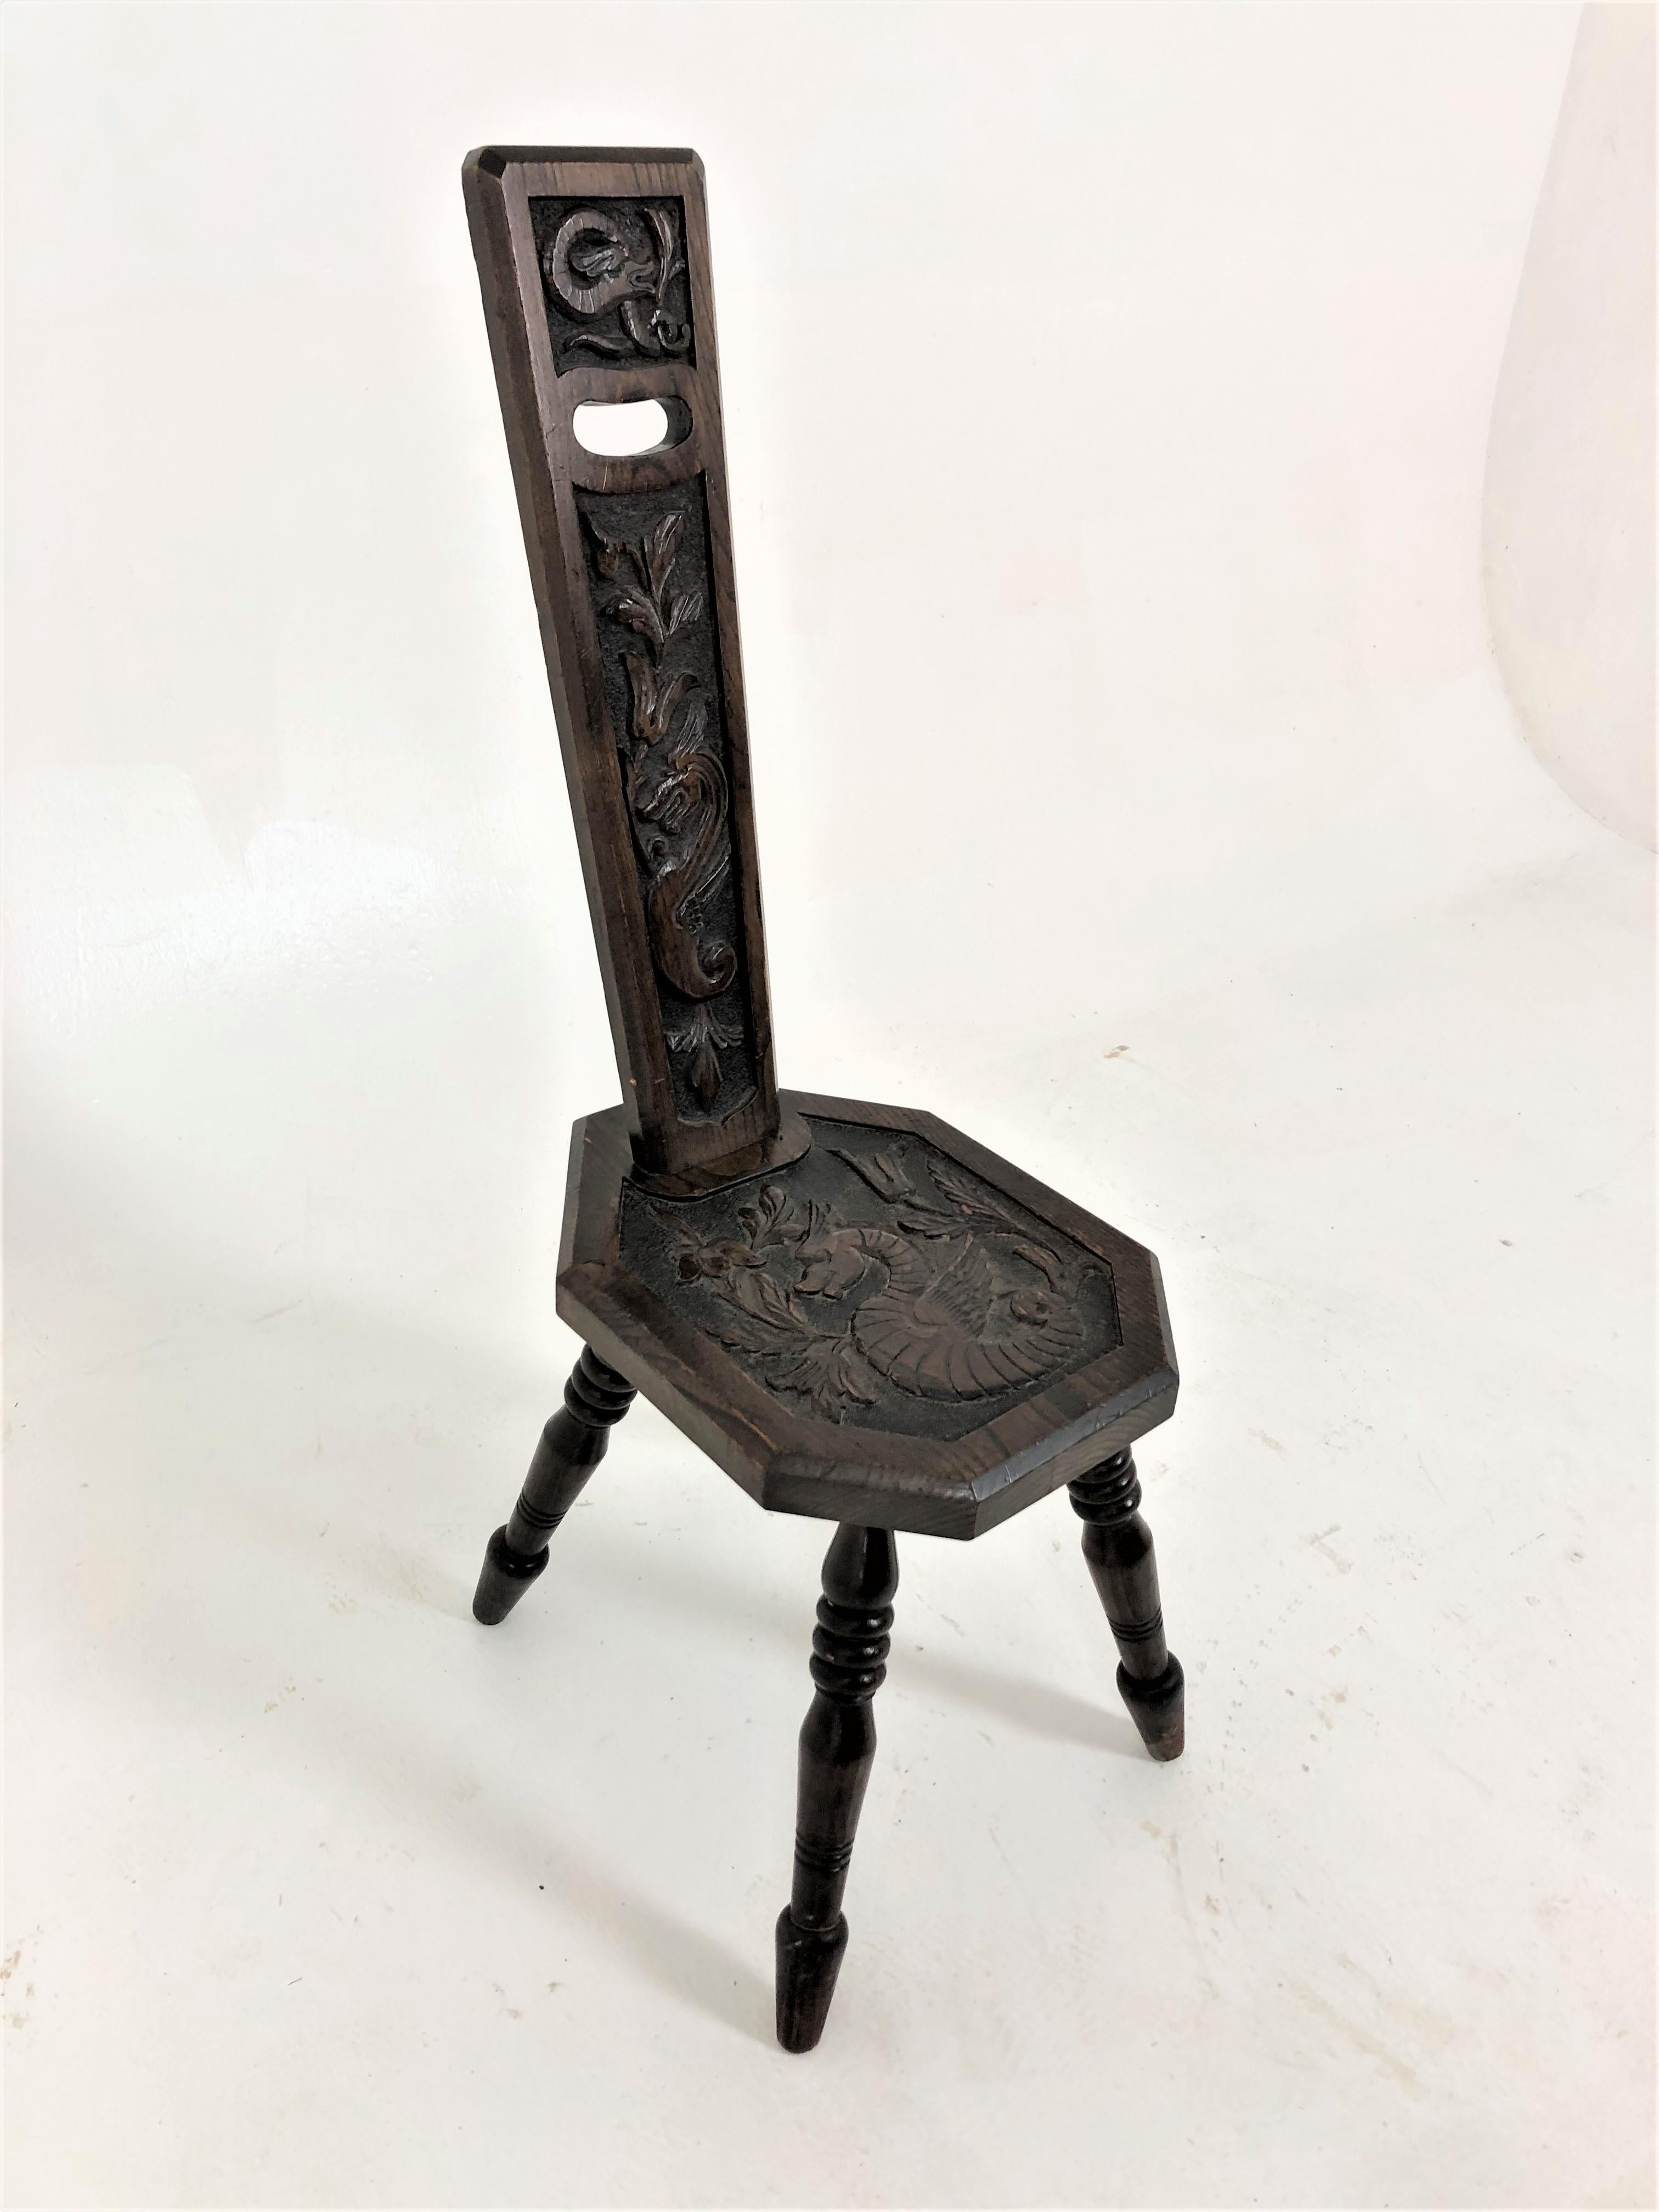 Antique Carved Oak spinning chair, plant stand, Scotland 1880, H712

Scotland 1880
Solid Oak
Original finish
Carved dragon back with a pierced handle
Carved dragon seat
Raised on four turned supports
Beautiful carving and in good